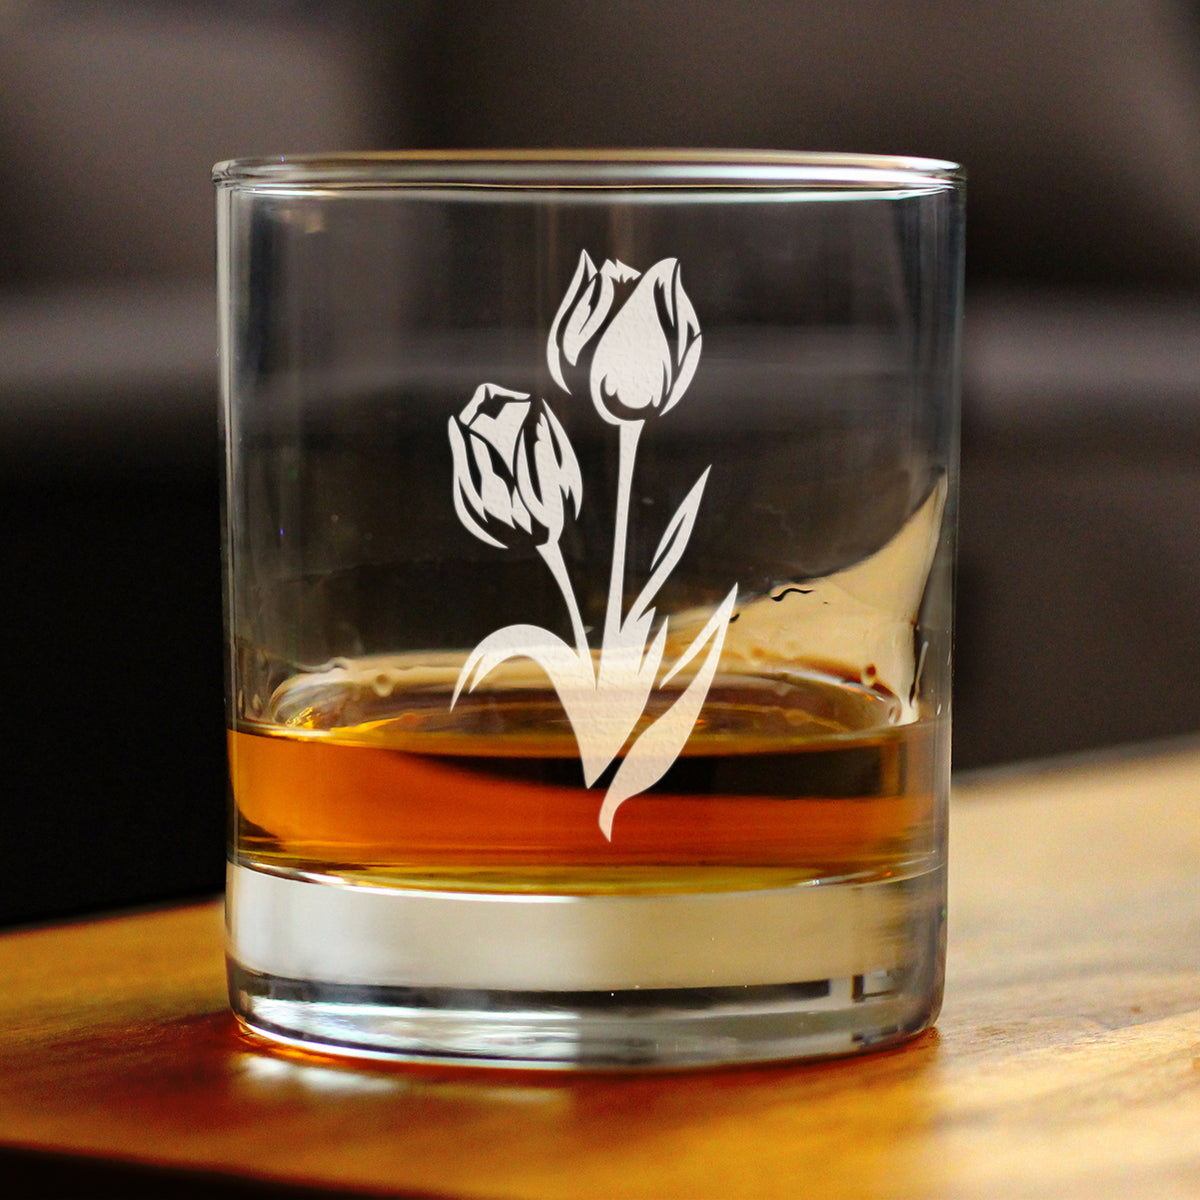 Tulip Whiskey Rocks Glass - Floral Themed Decor and Gifts for Flower Lovers - 10.25 Oz Glasses